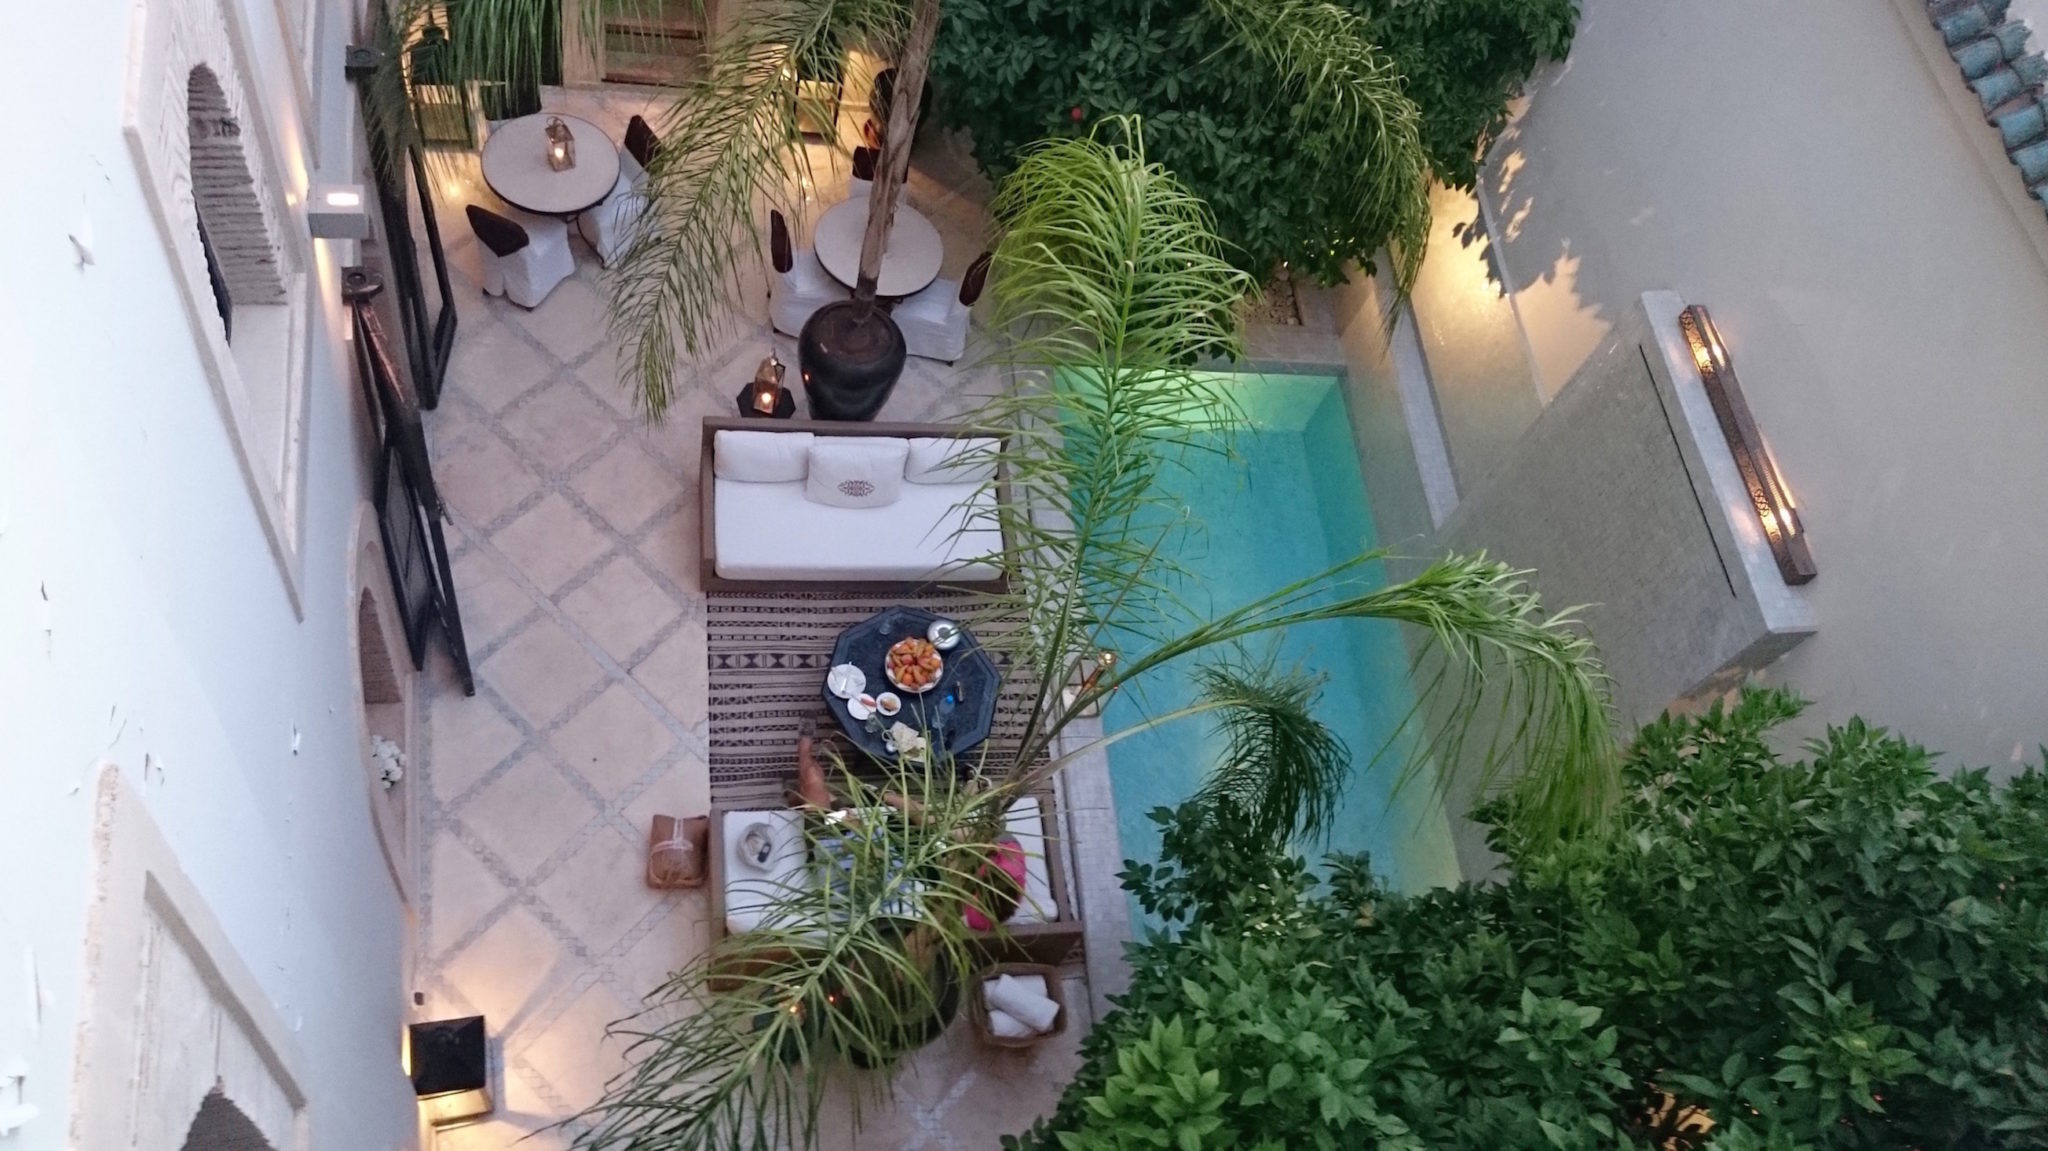 An aerial view of a riad courtyard with a pool